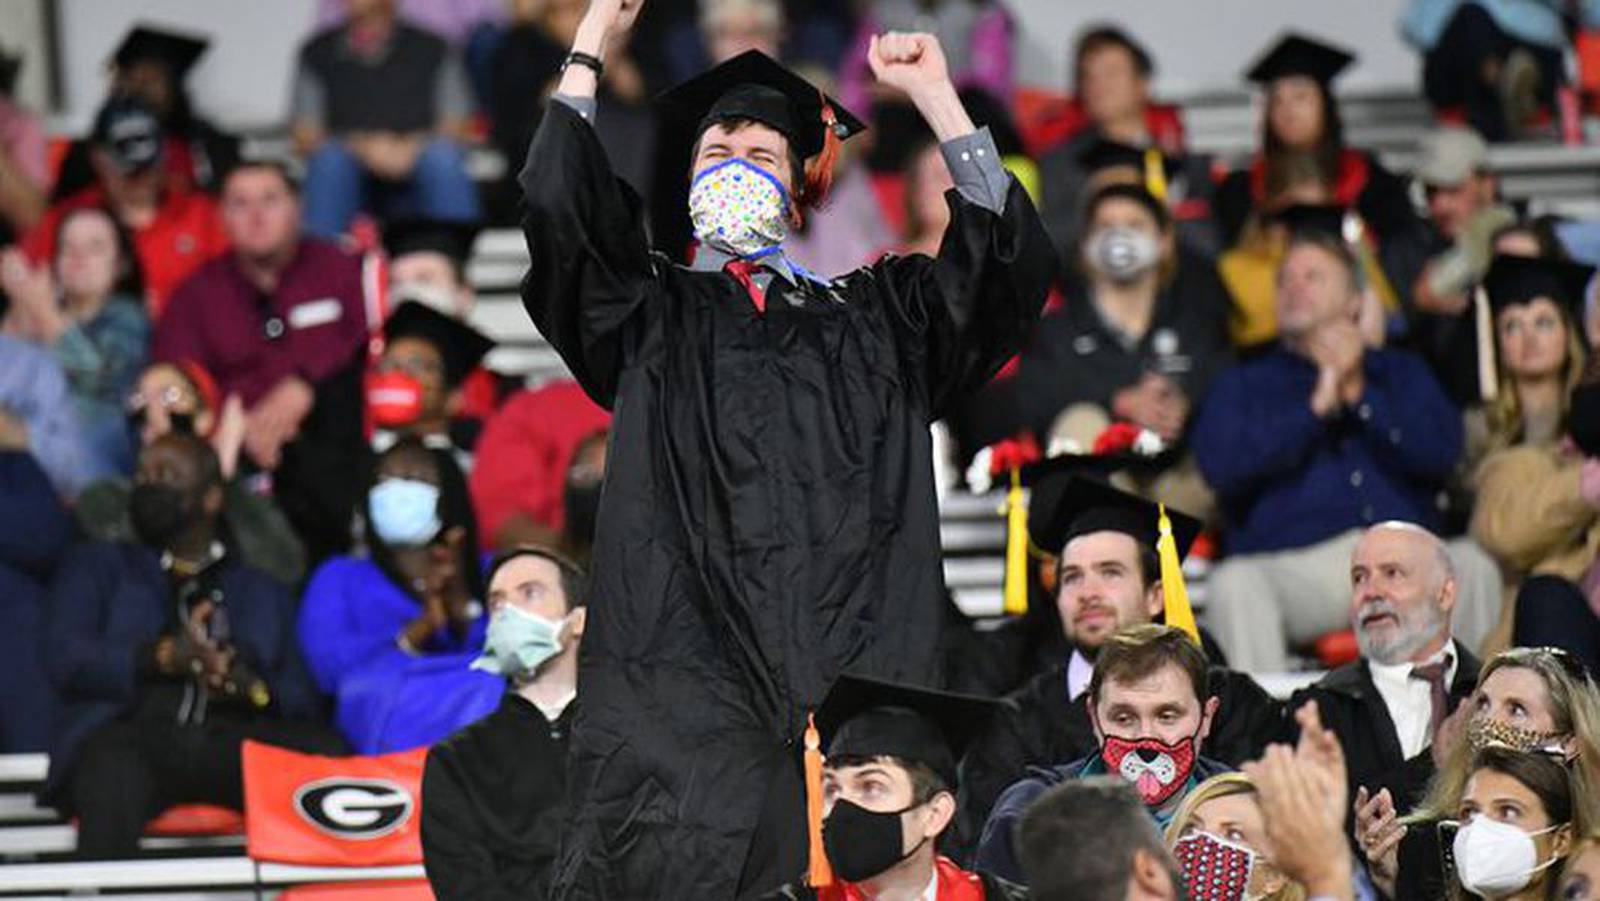 UGA to allow graduates to have unlimited guests at spring commencement ceremony WSBTV Channel